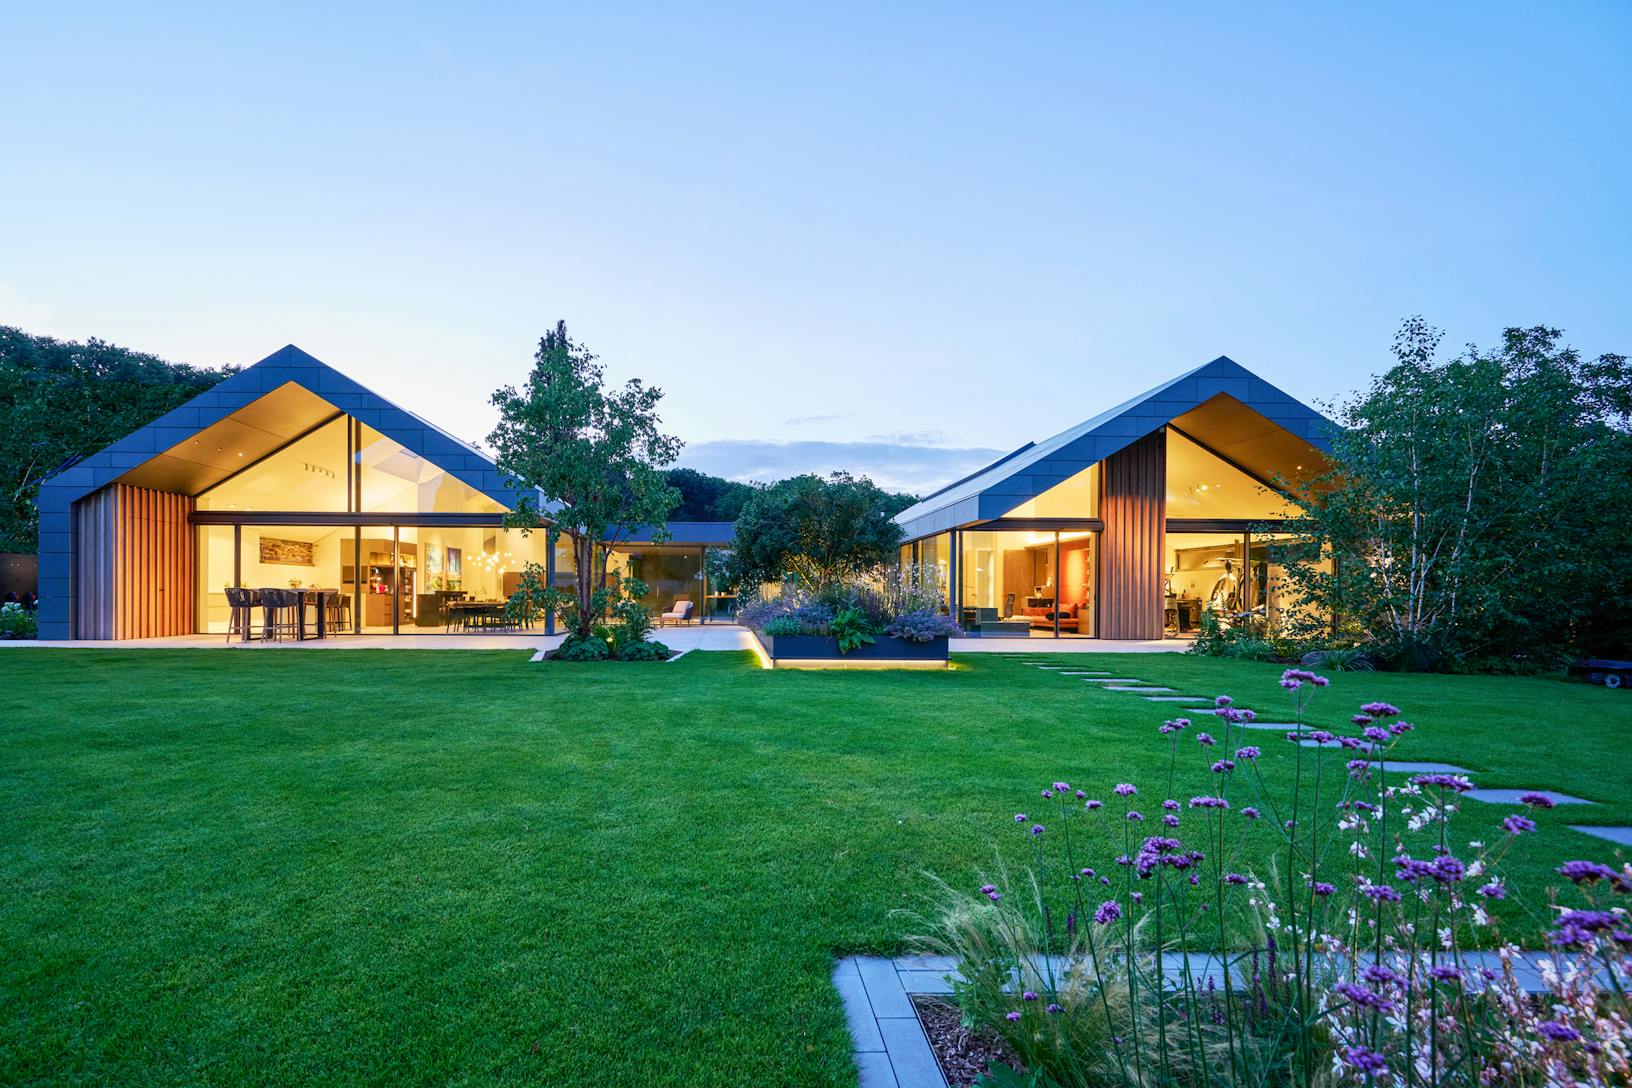 A modern house in the middle of a lush green lawn - exterior glass walls